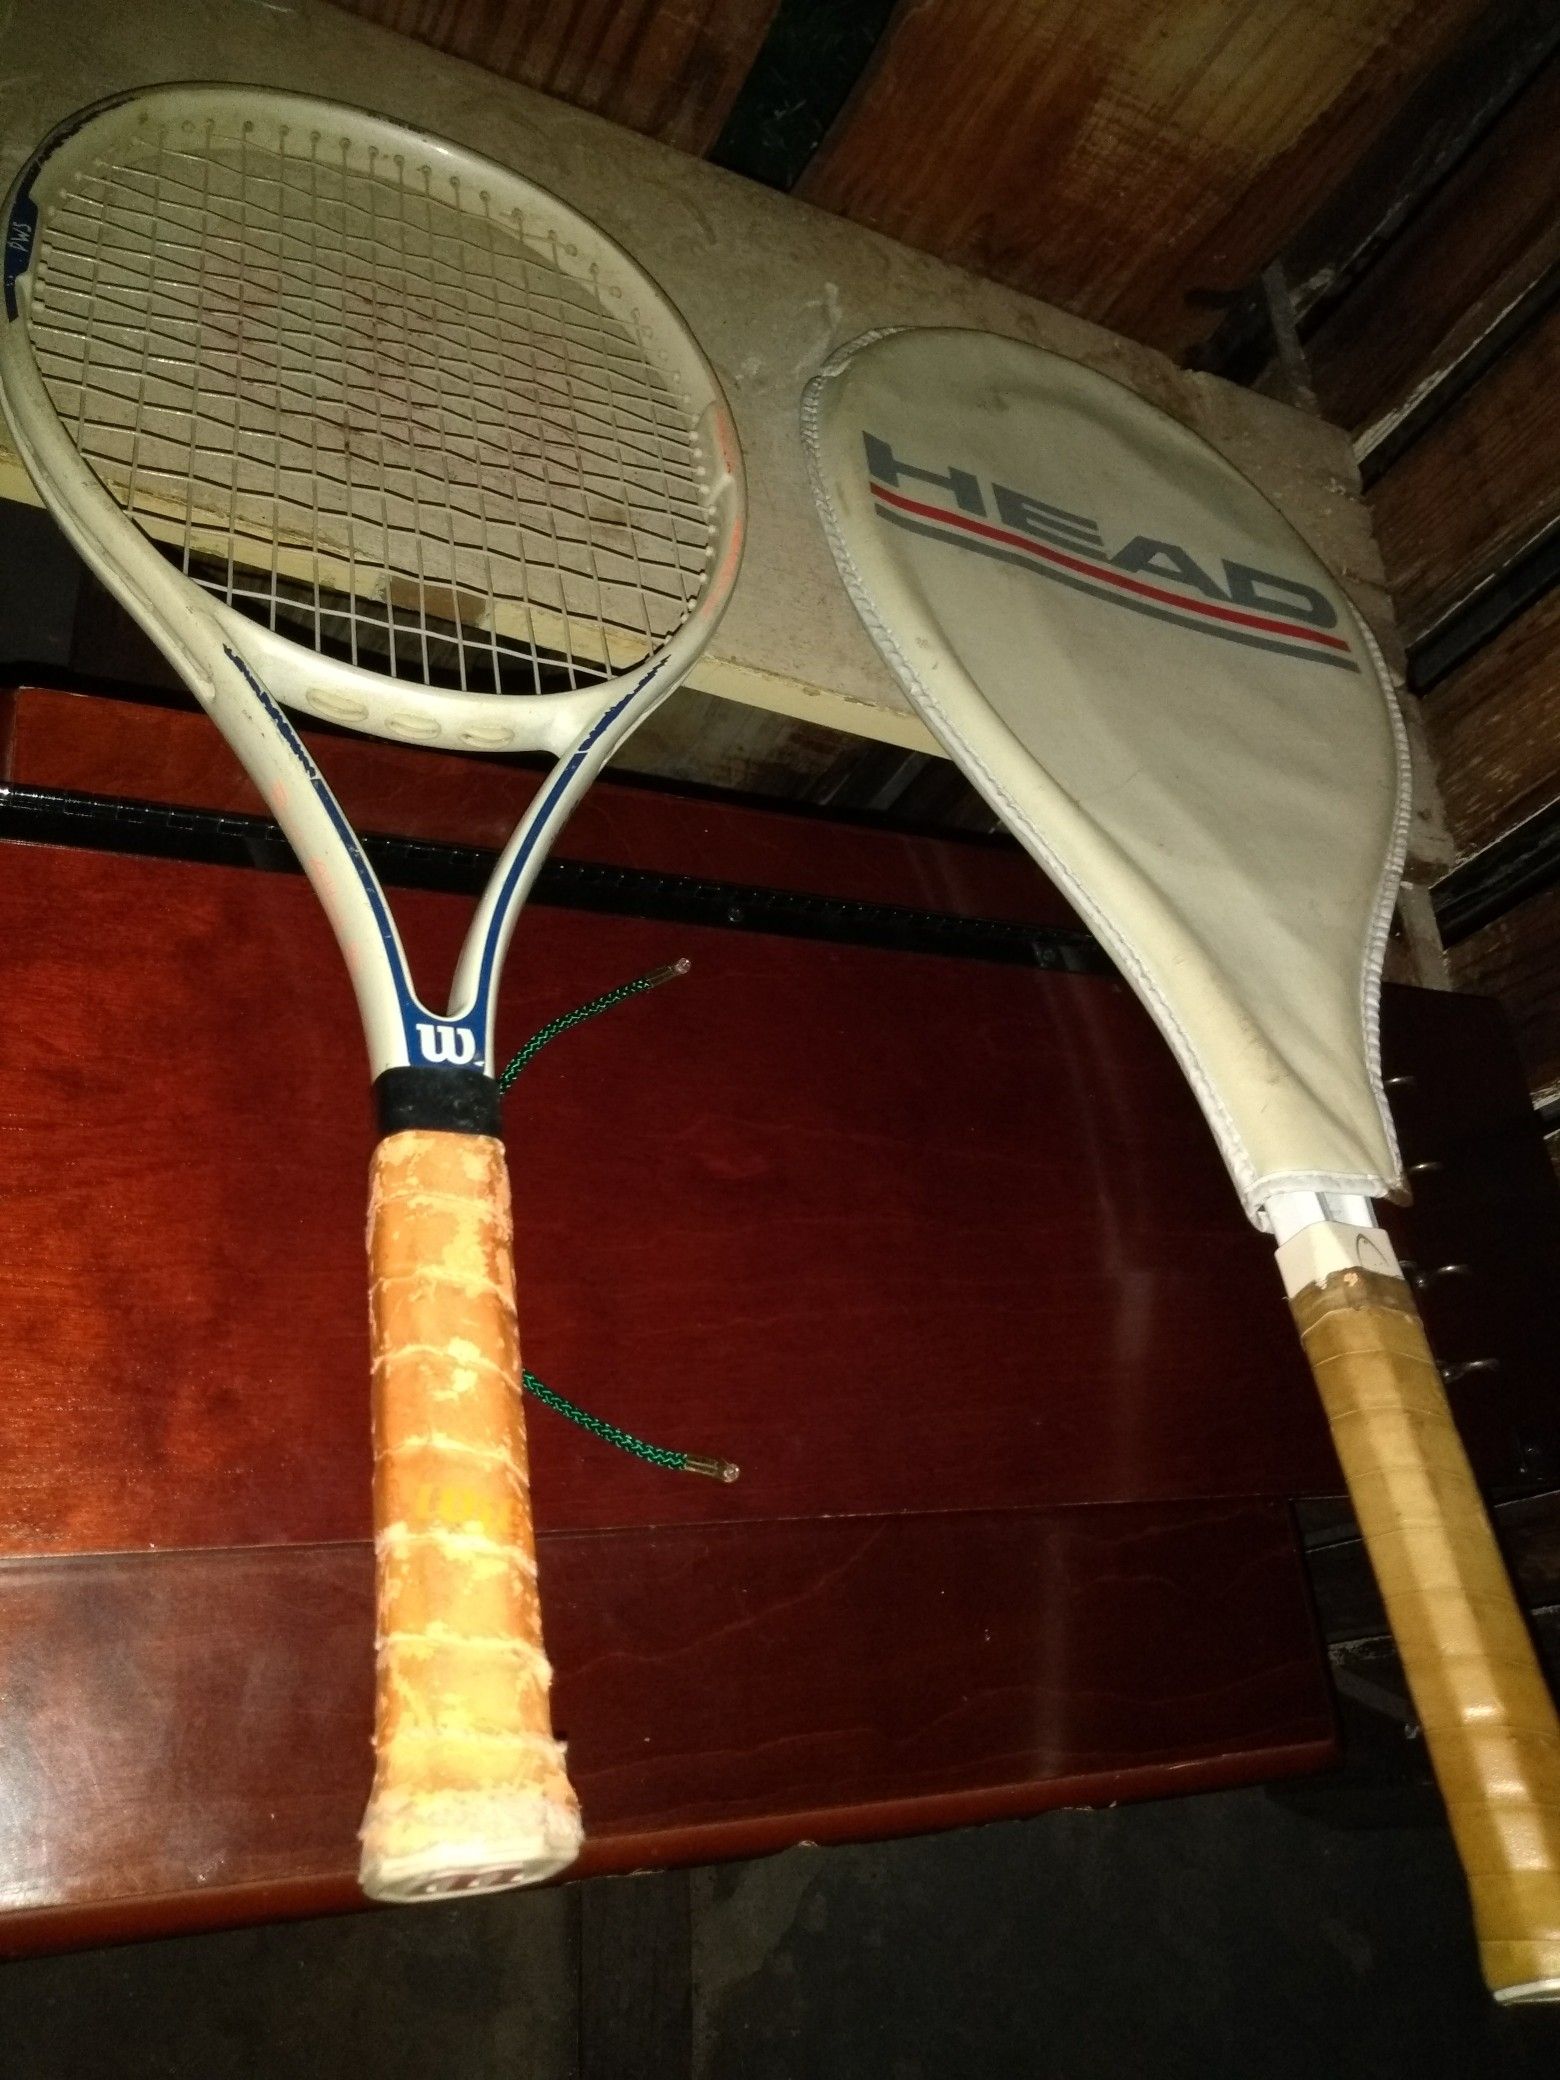 He set of two tennis rackets one with a case good condition use I am in Lakewood Ohio and I do deliver